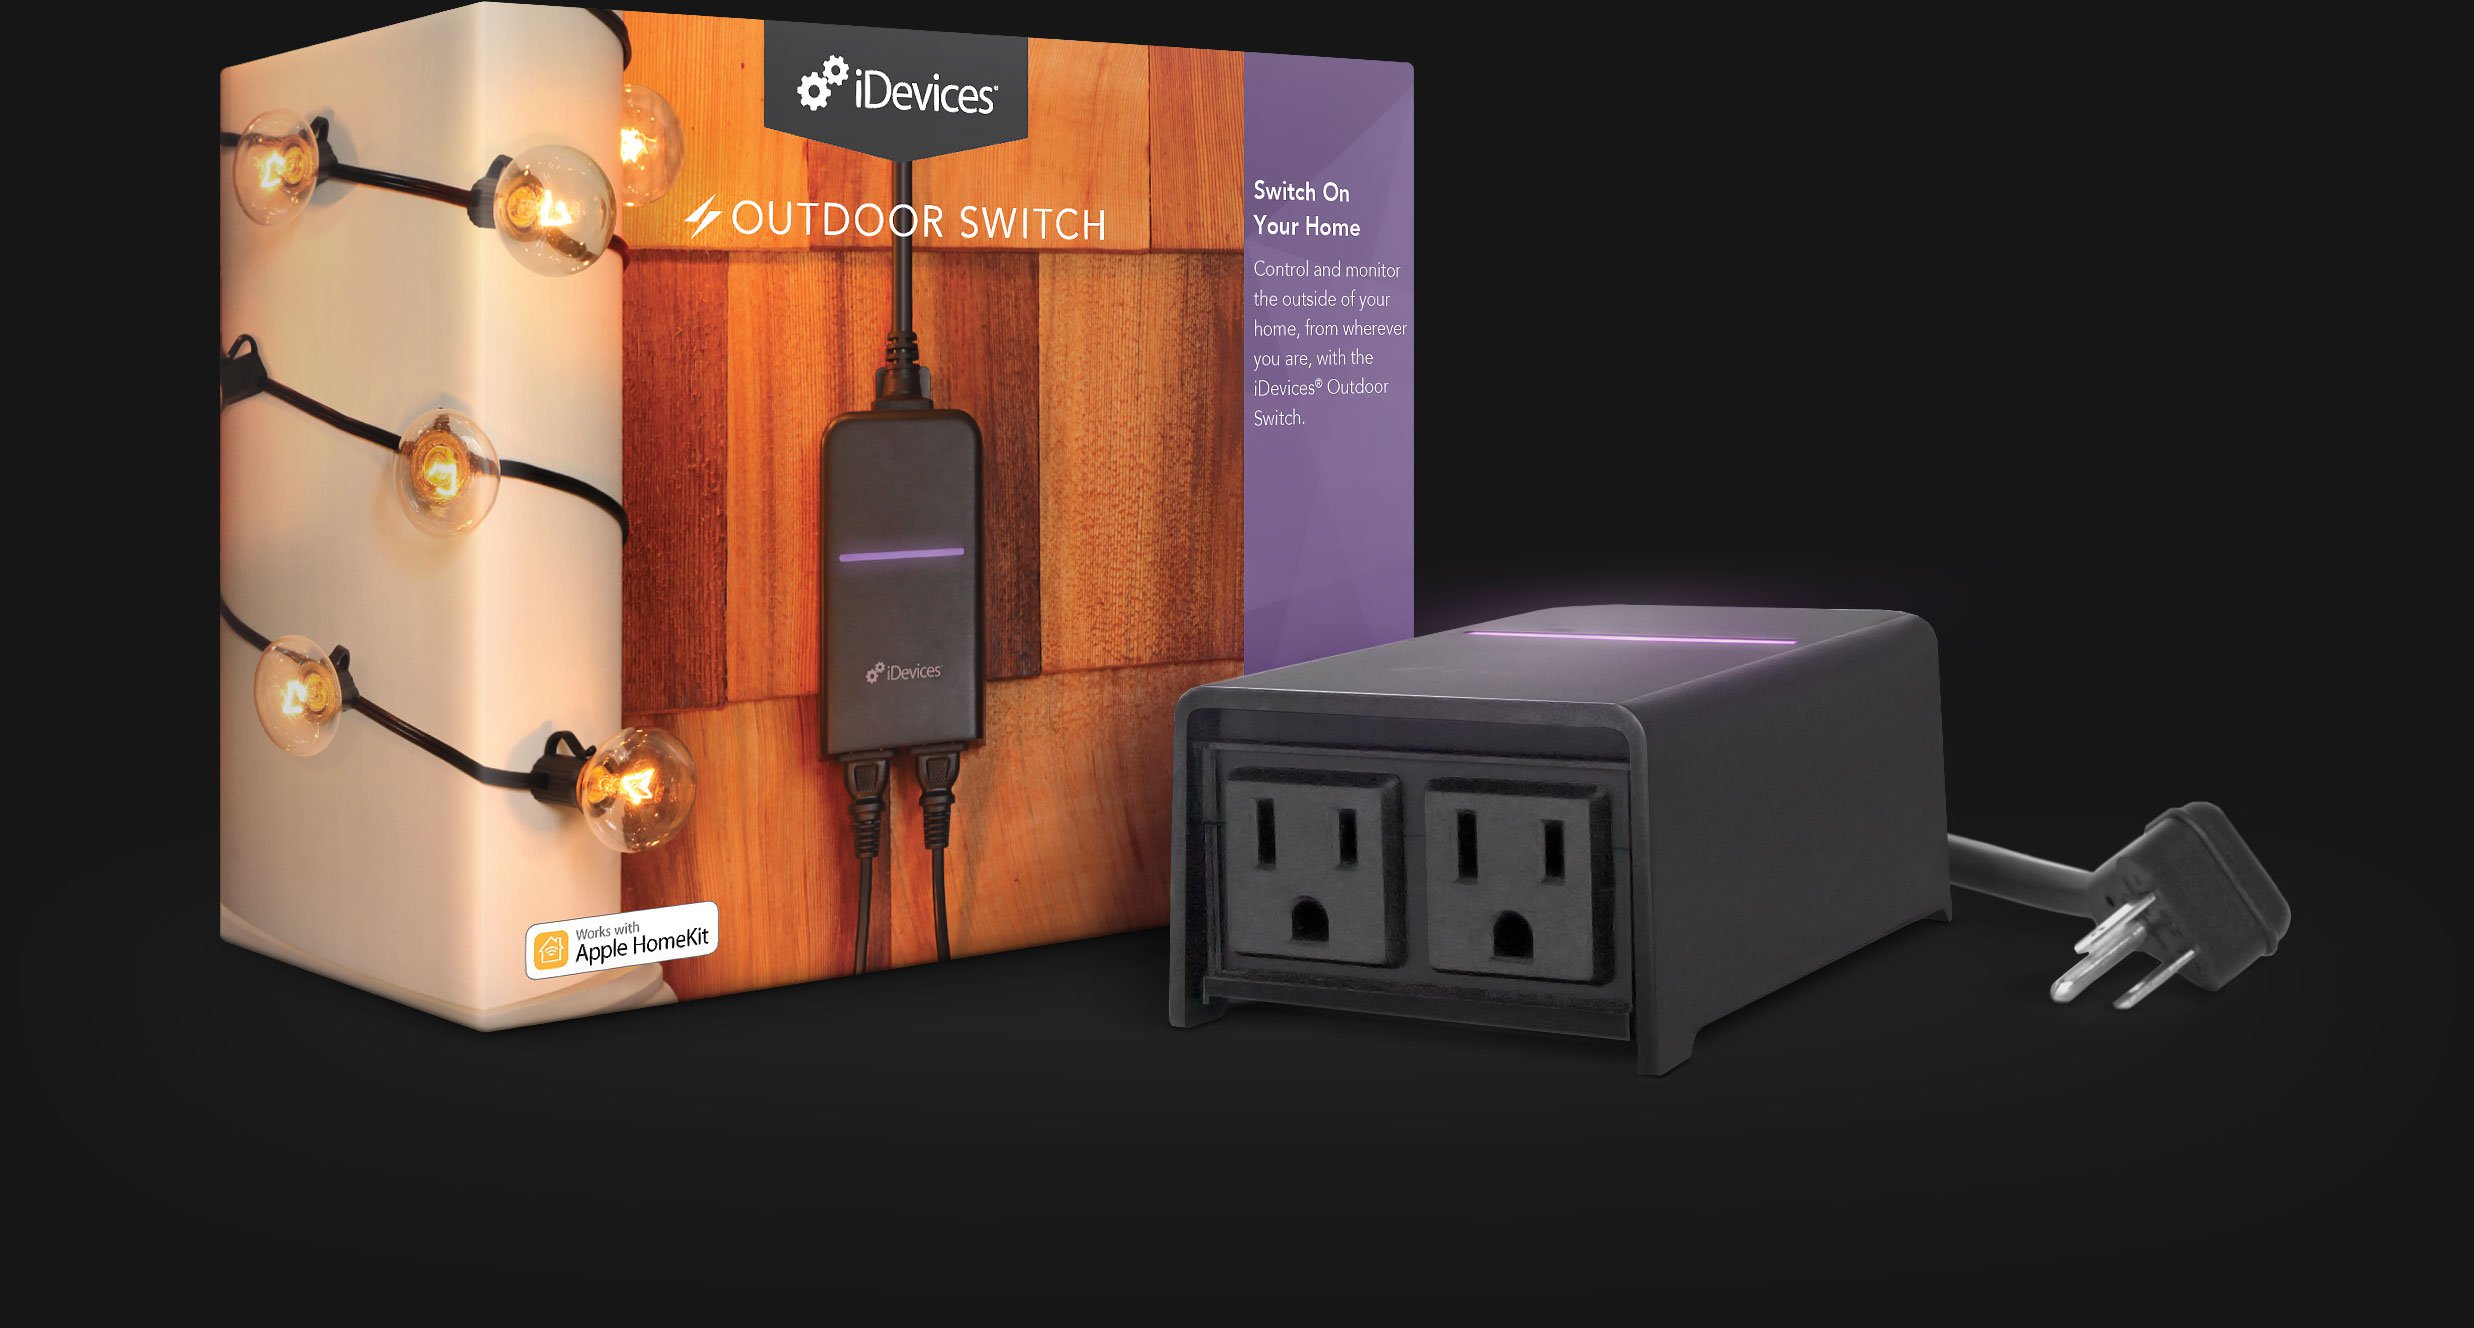 iDevices Outdoor Switch, Smart Plug, Connected Plug, Plug and Play, Apple Homekit, Amazon Alexa, Google Assistant, Google Play, App Store, Wi-Fi, Voice Control, Siri, Switch on your home, iOS, Samsung